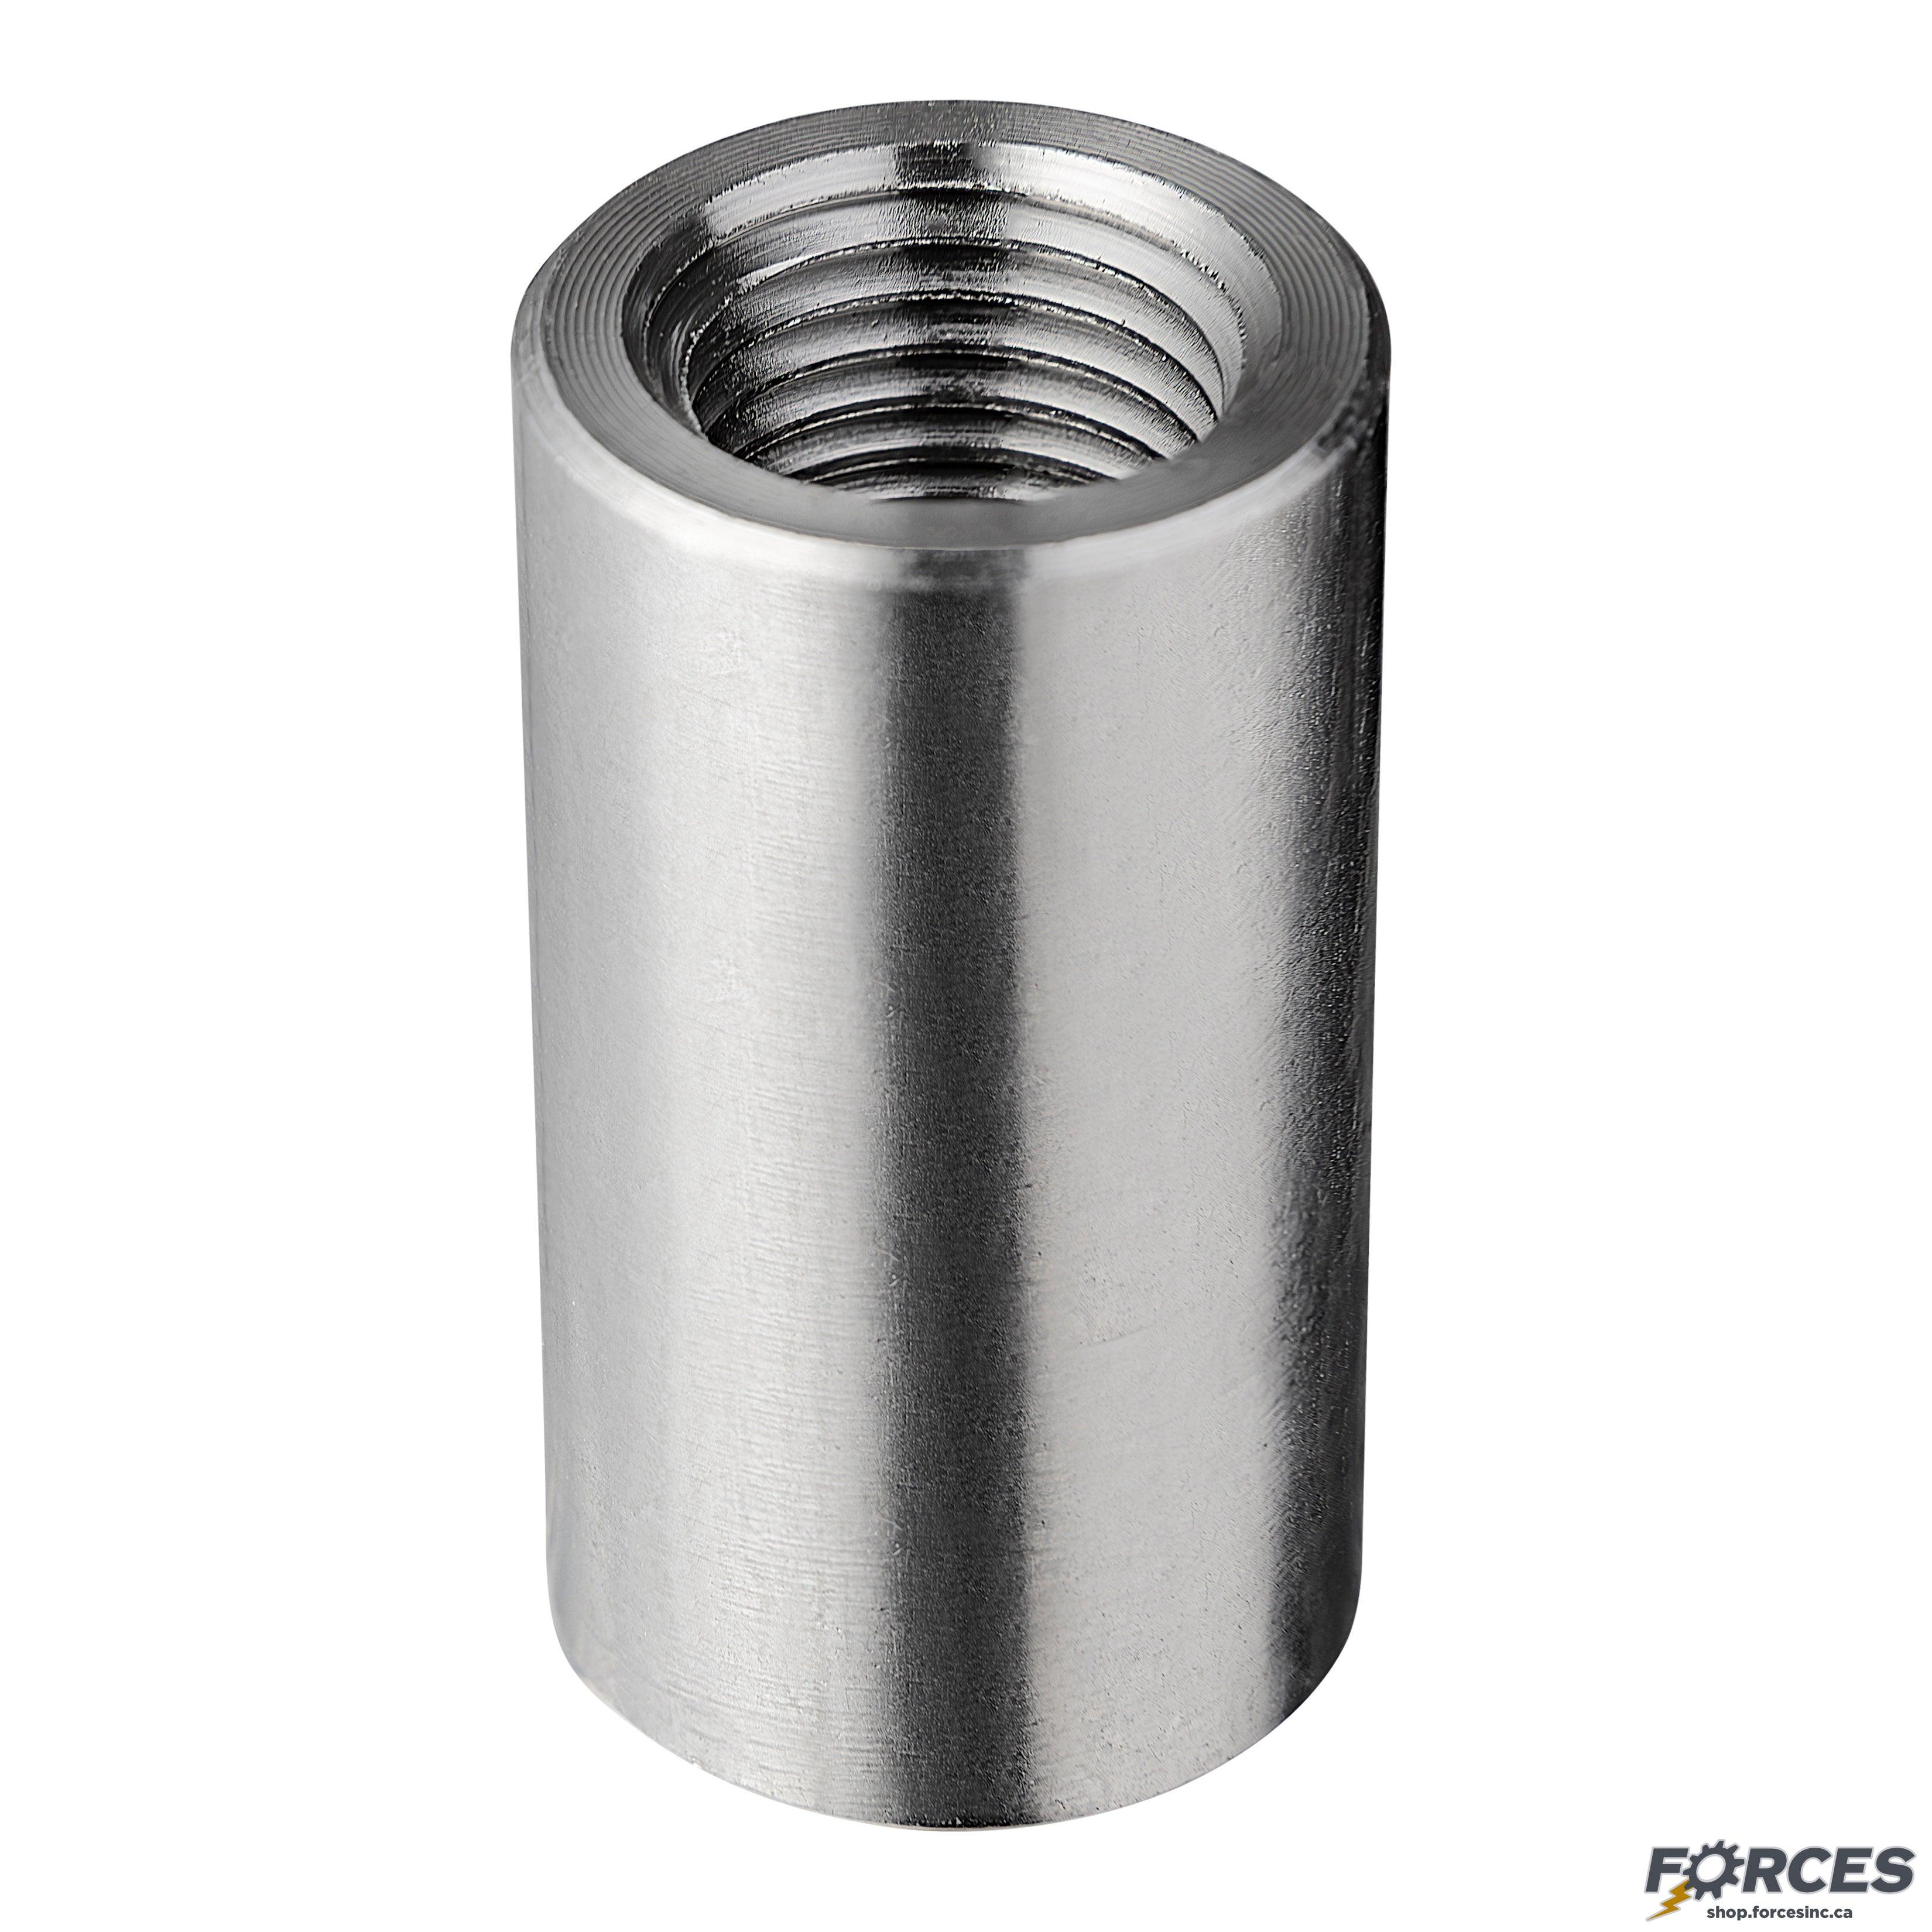 3/8" Full Coupling NPT #3000 - Stainless Steel 316 - Forces Inc